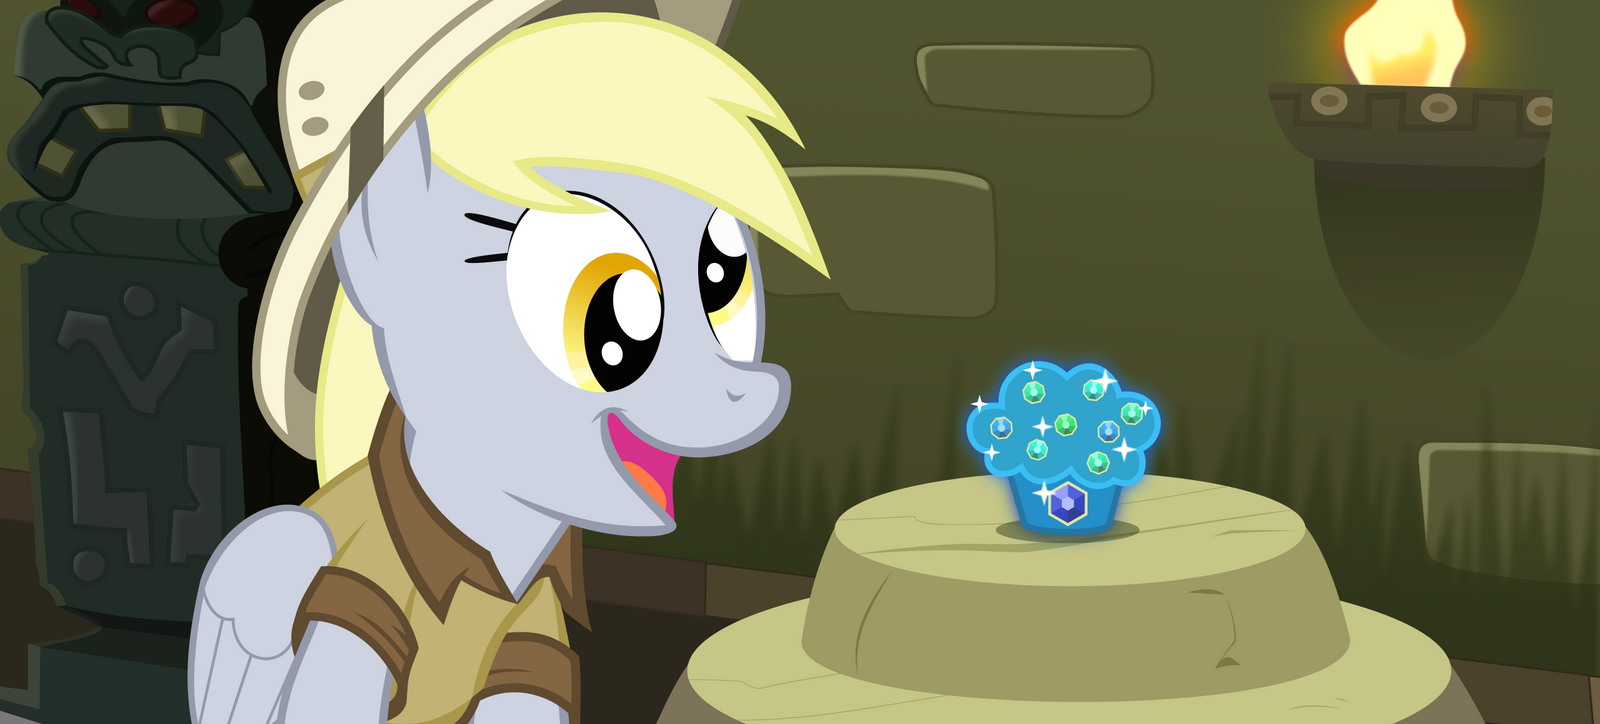 daring_derpy_and_the_sapphire_muffin_by_